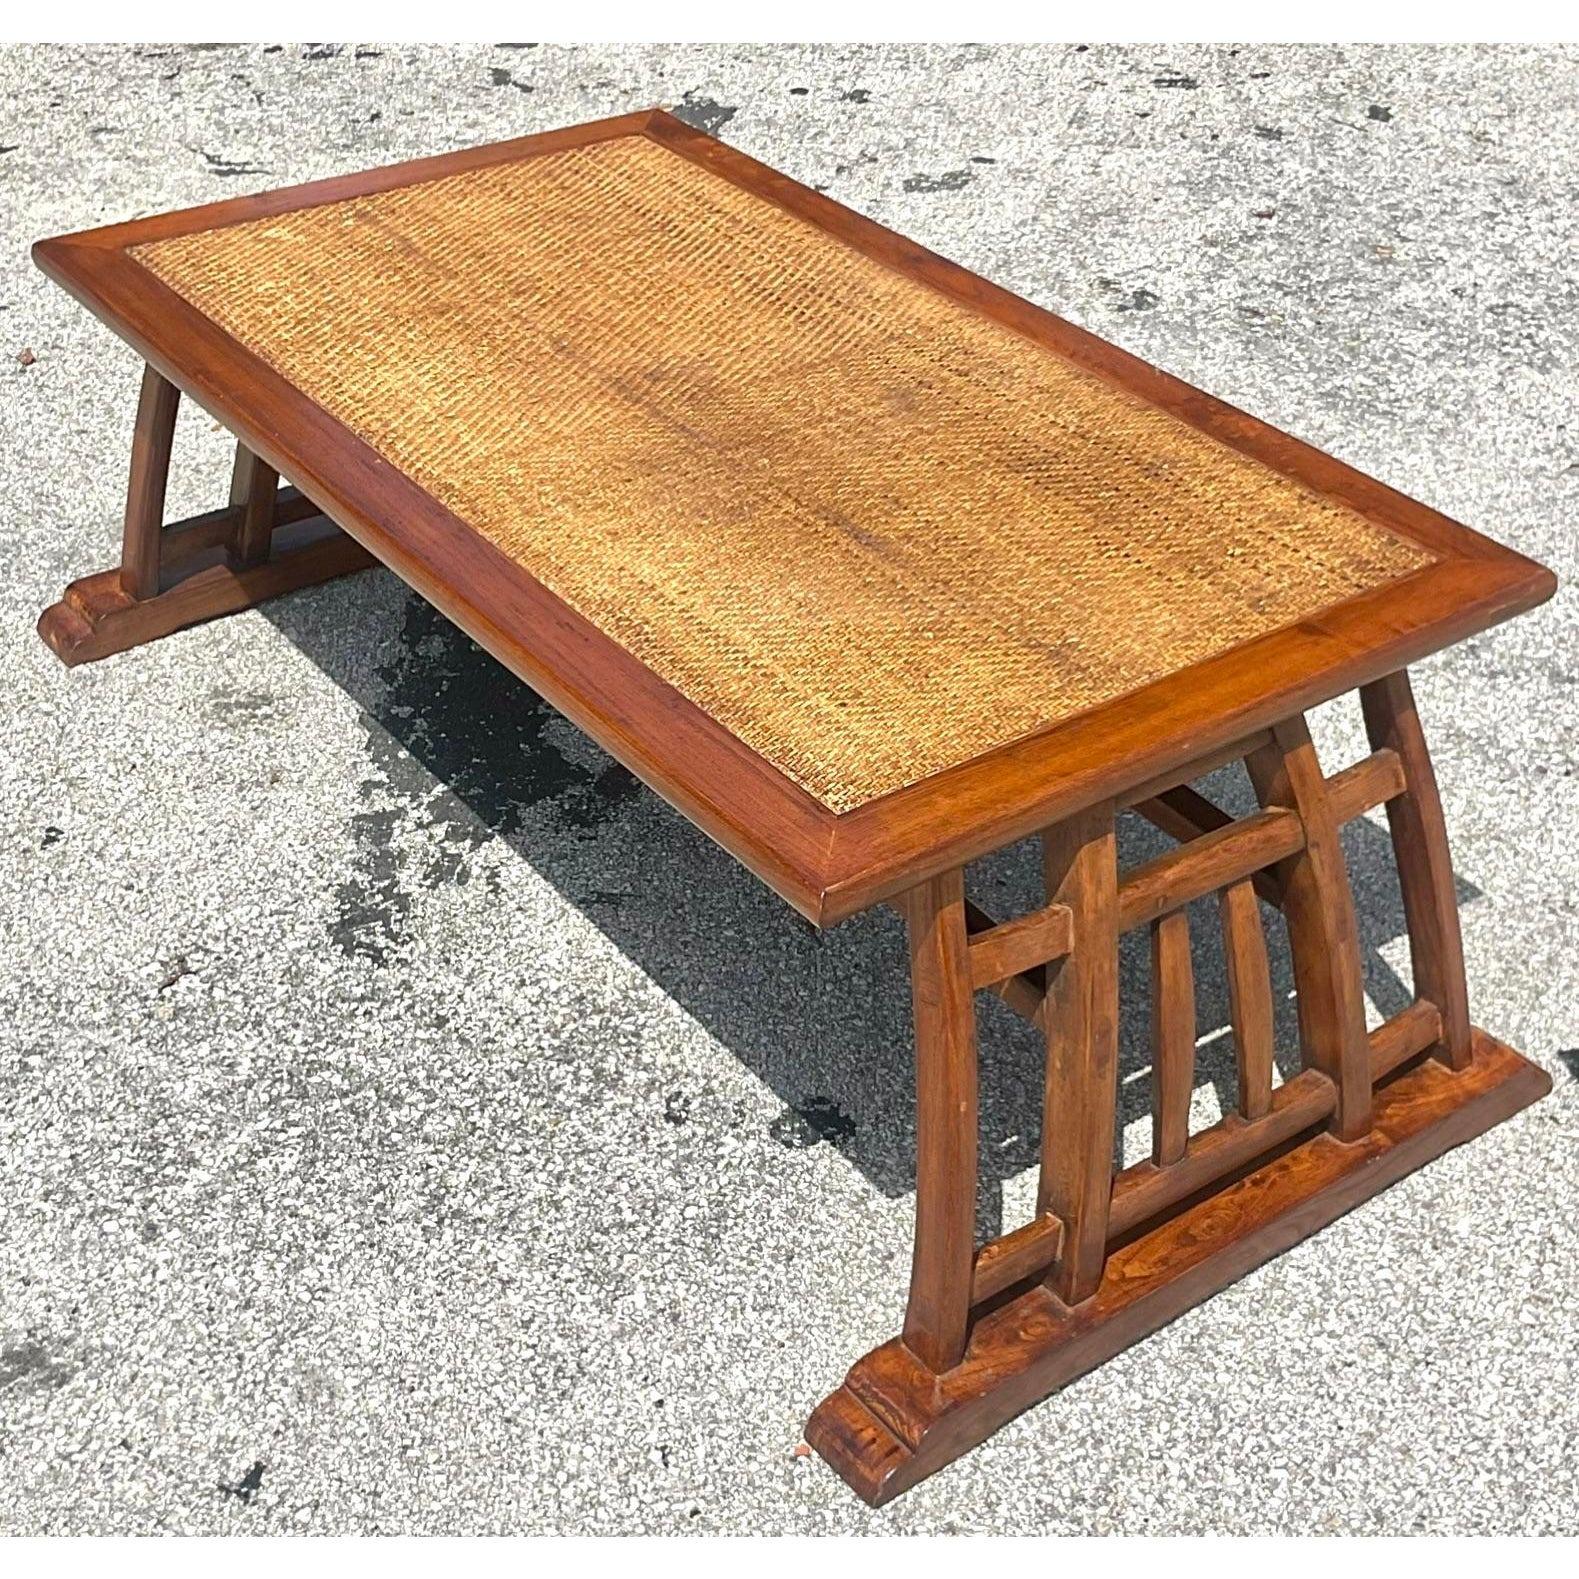 Late 20th Century Vintage Coastal Teak Coffee Table With Woven Rattan Panel In Good Condition For Sale In west palm beach, FL